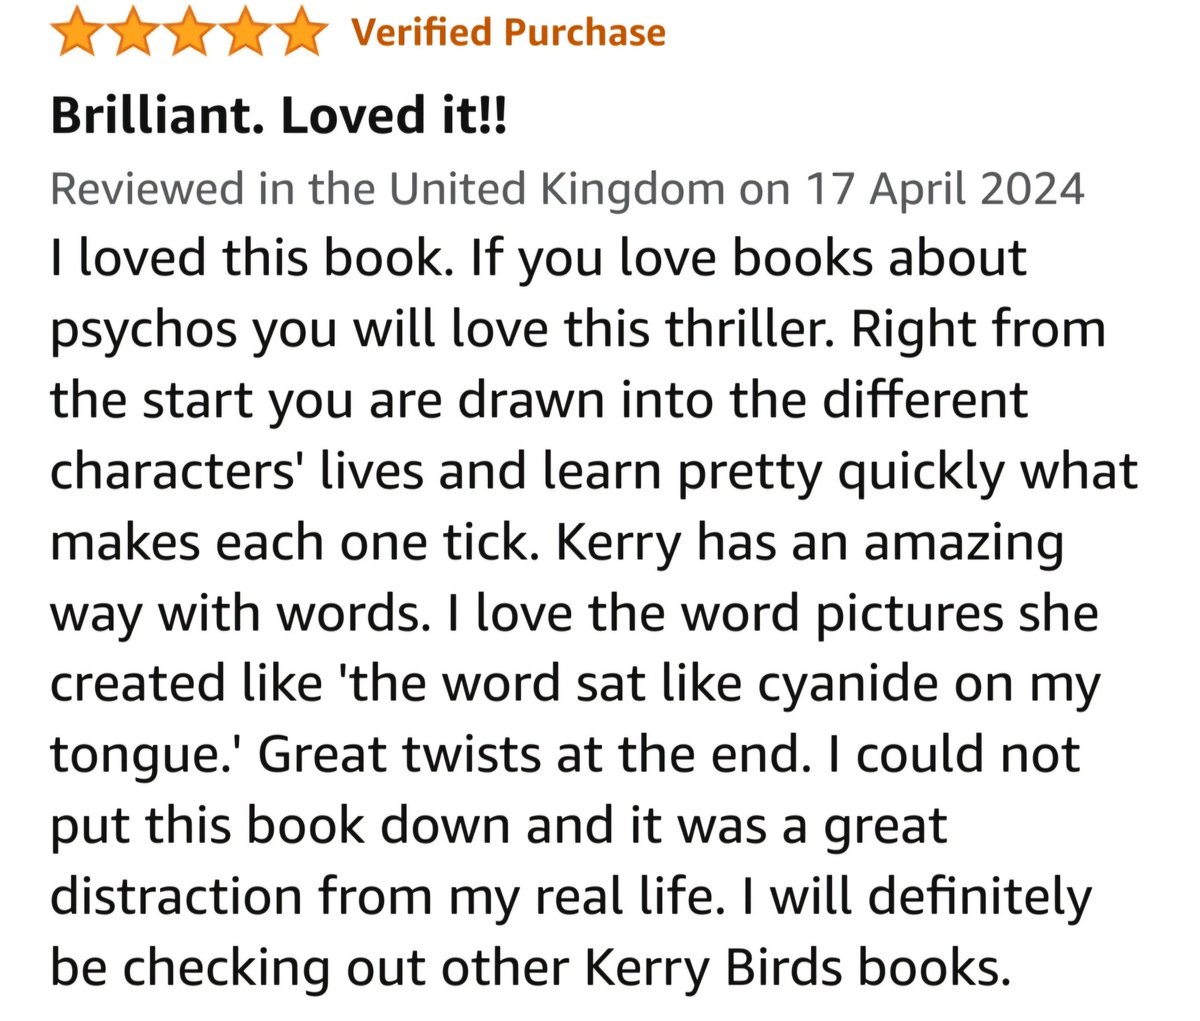 With the latest edition, my book now has an incredible 41 reviews/ratings - something I never imagined when I abandoned it last year. So, thank you everyone who has given their time. I'm very grateful 🙂

(link below if you're interested!)

#books #domesticthriller #CrimeFiction